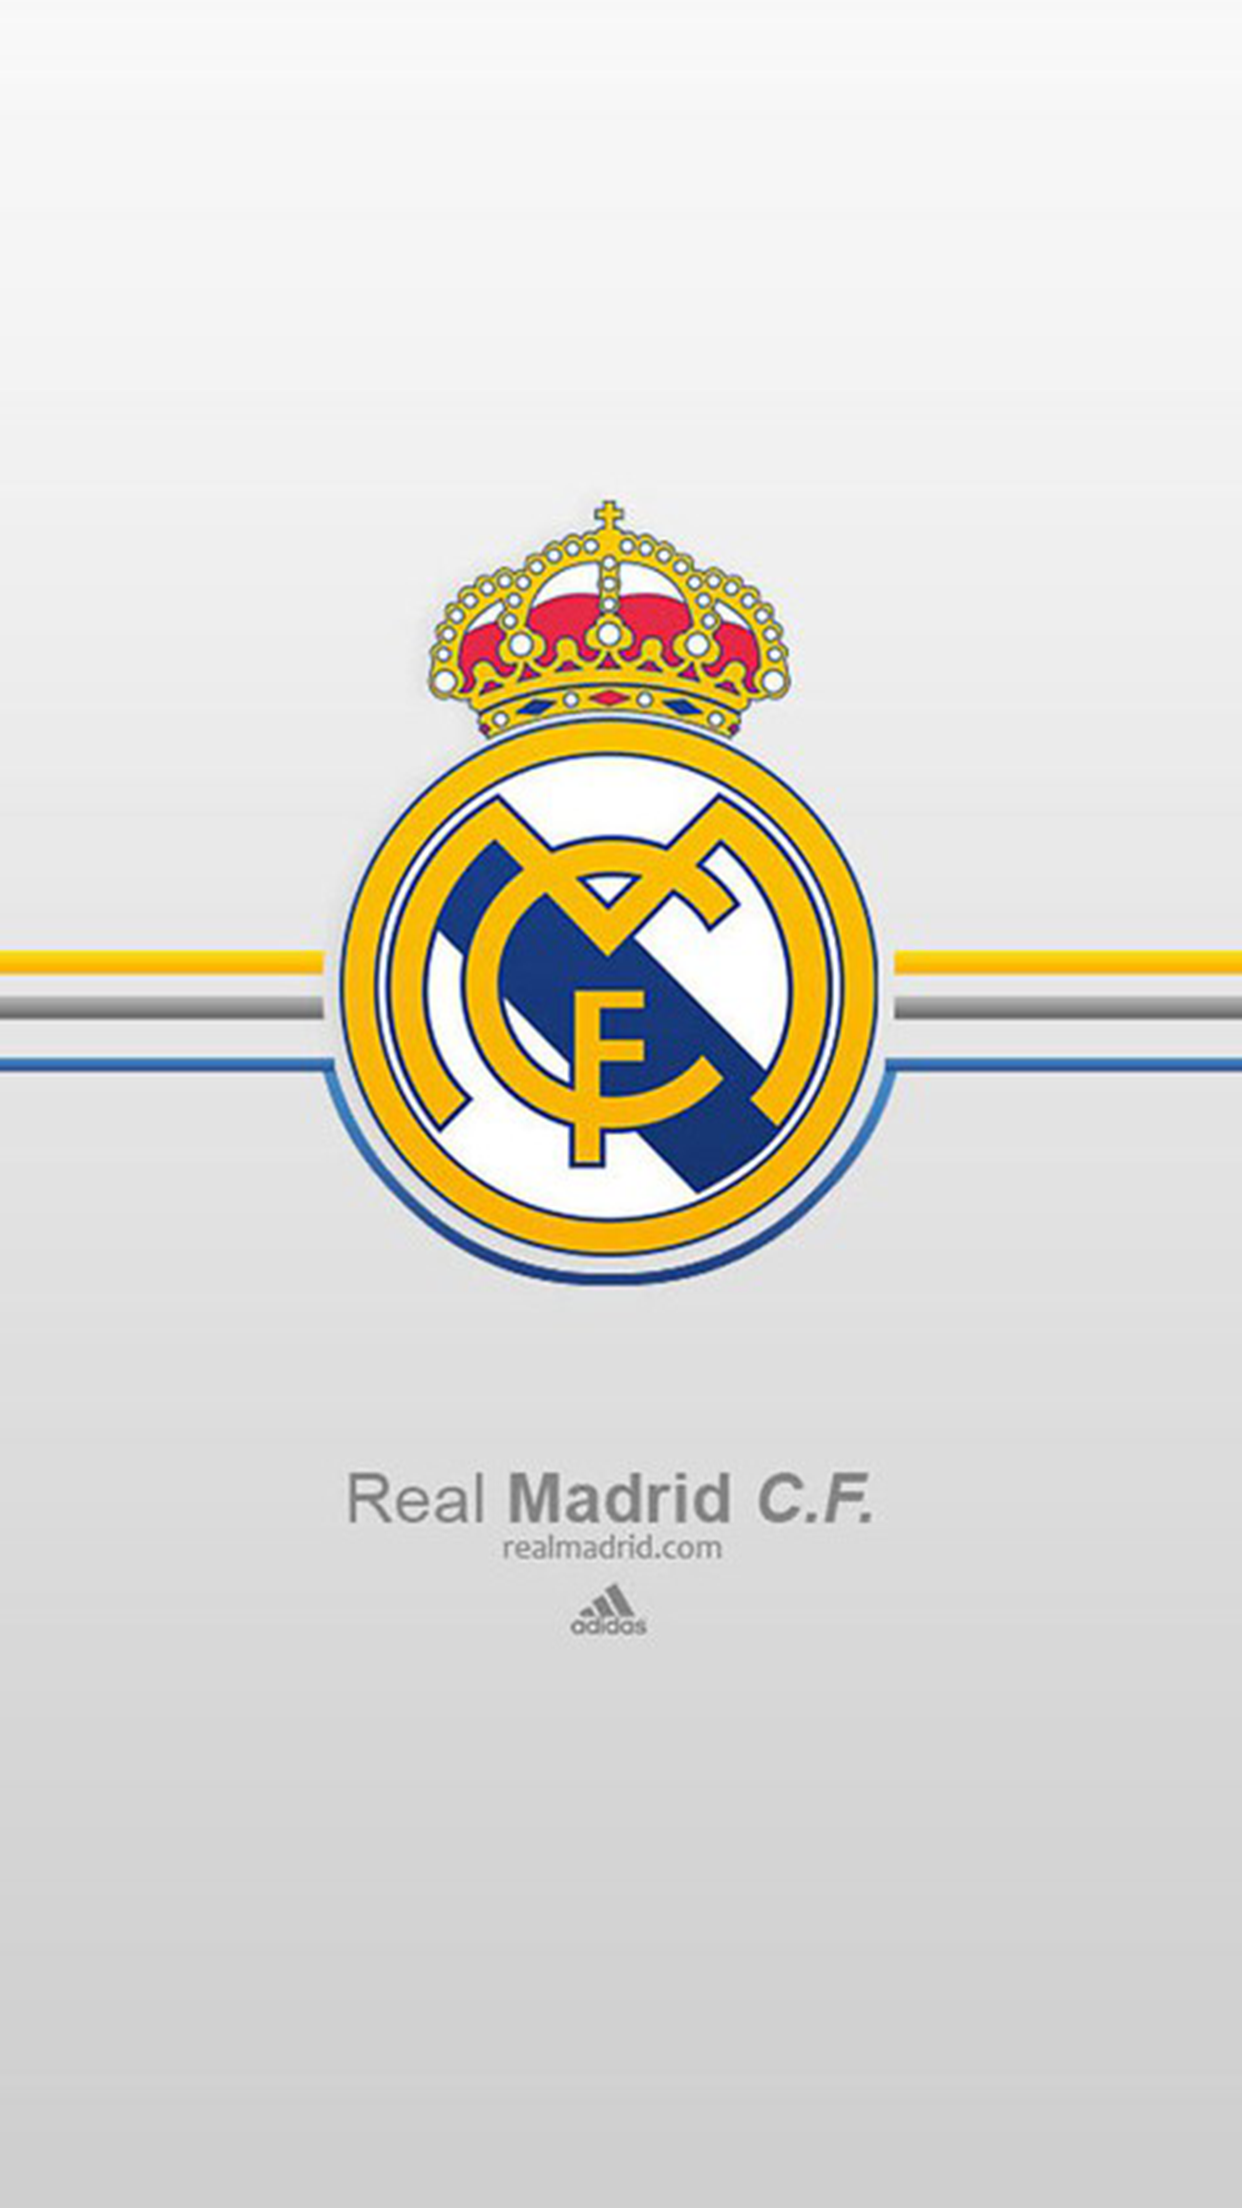 Real Madrid Wallpapers in 2020